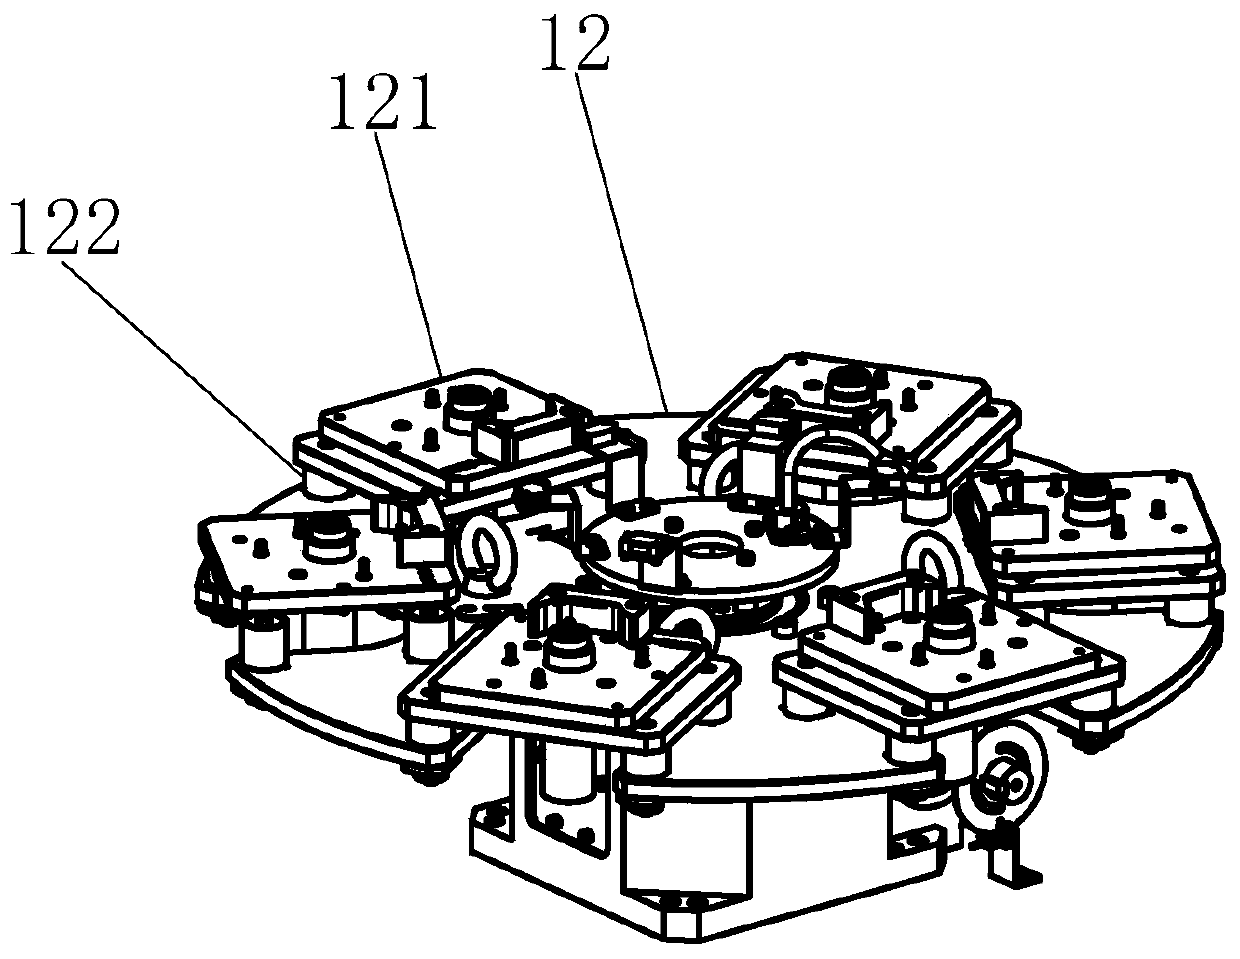 Water pump assembling equipment and water pump assembly line